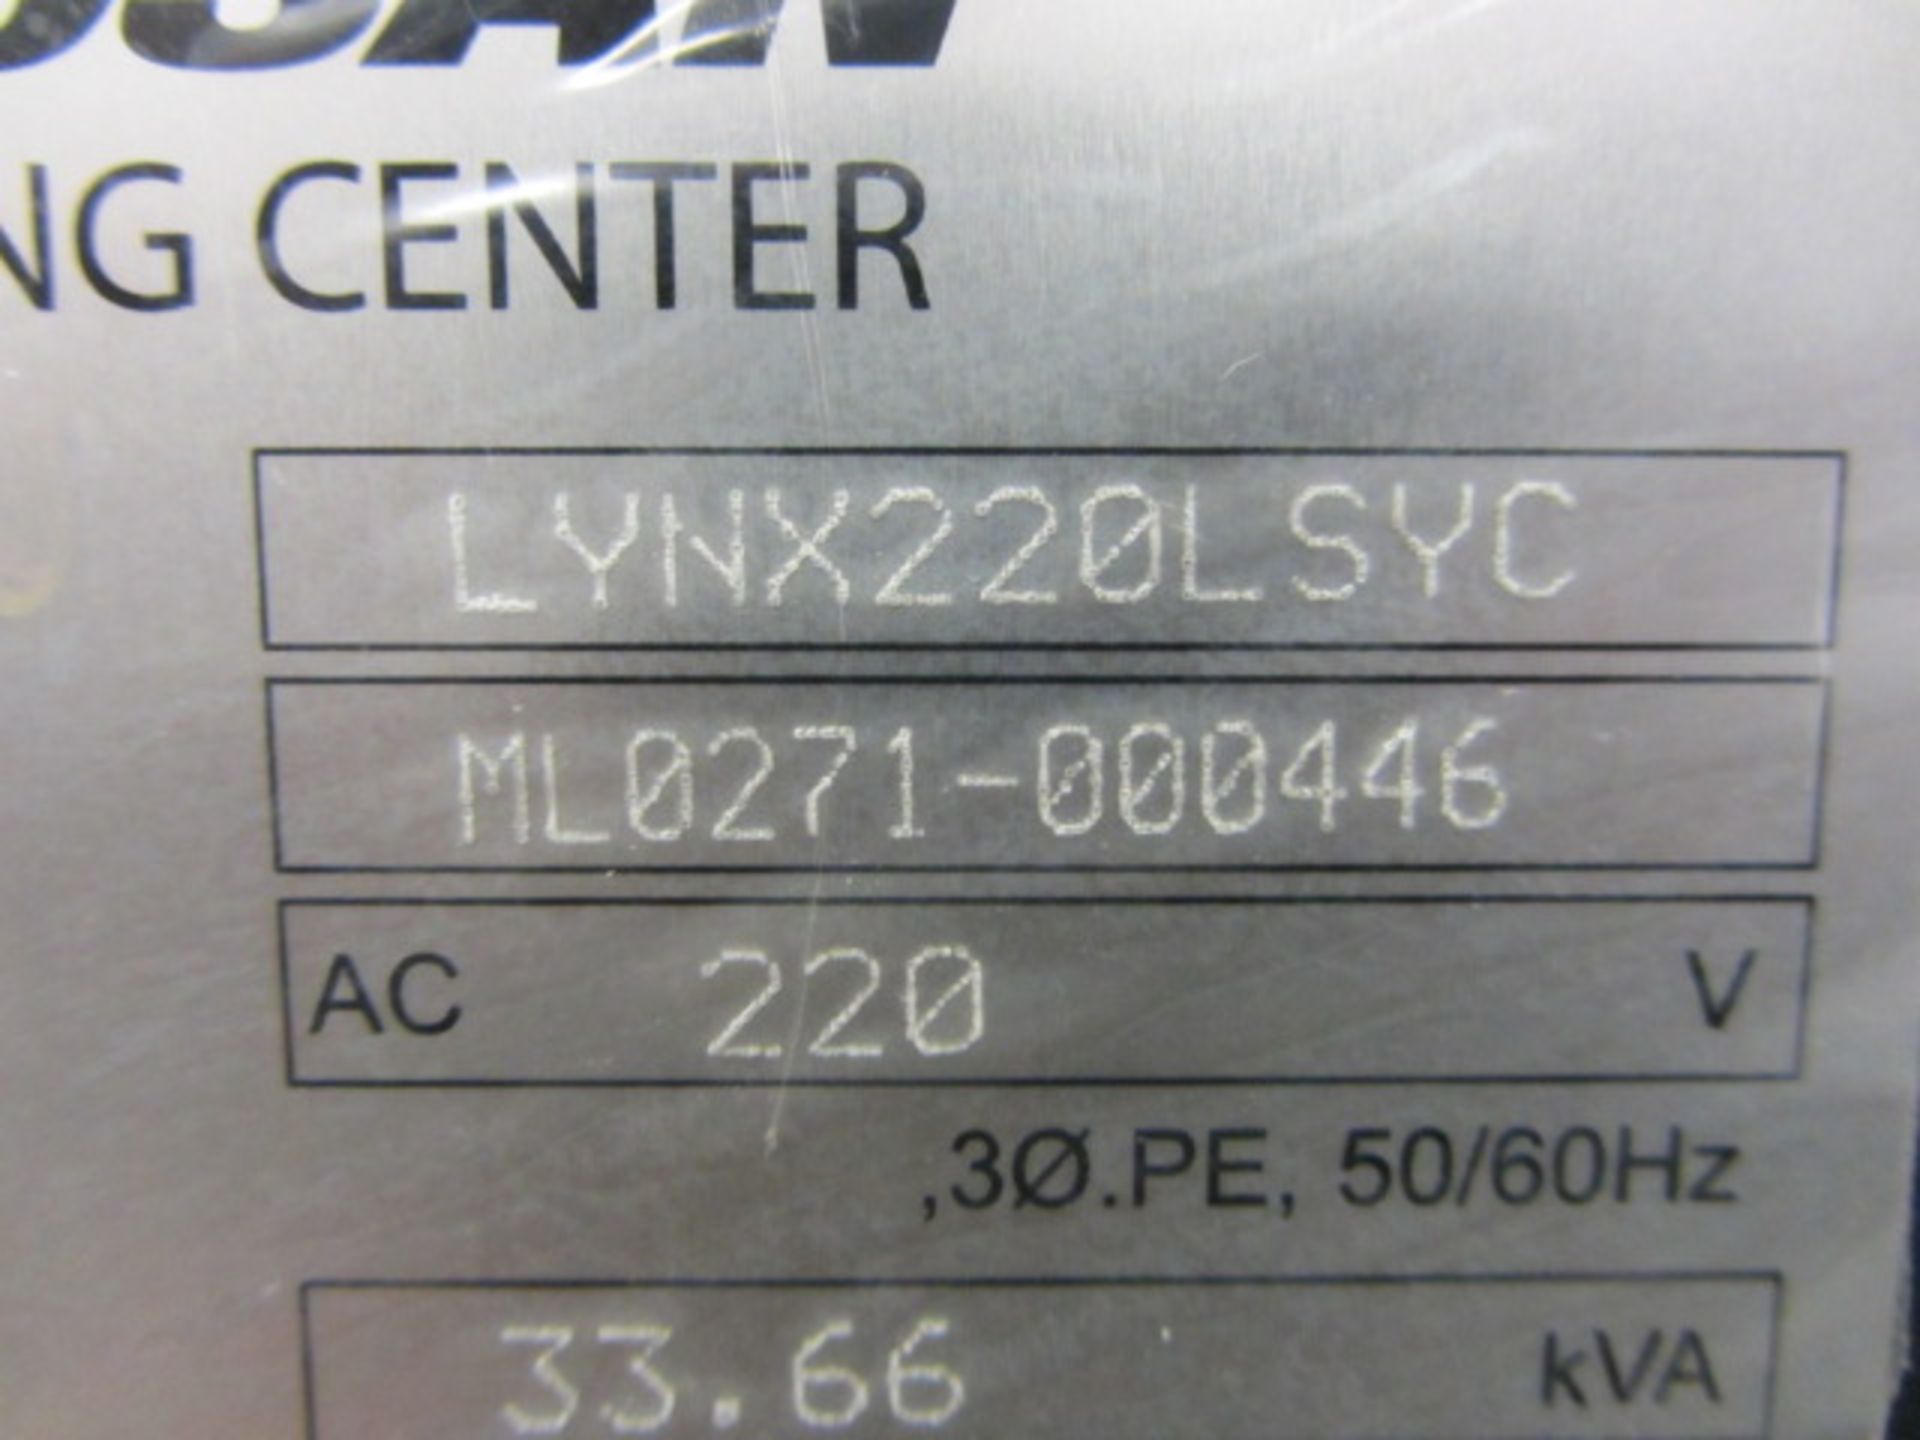 Doosan Lynx 220 LSYC CNC Turning Center with 8.25'' Chuck Main Spindle, 5.5'' Sub-Spindle, Y- - Image 9 of 9